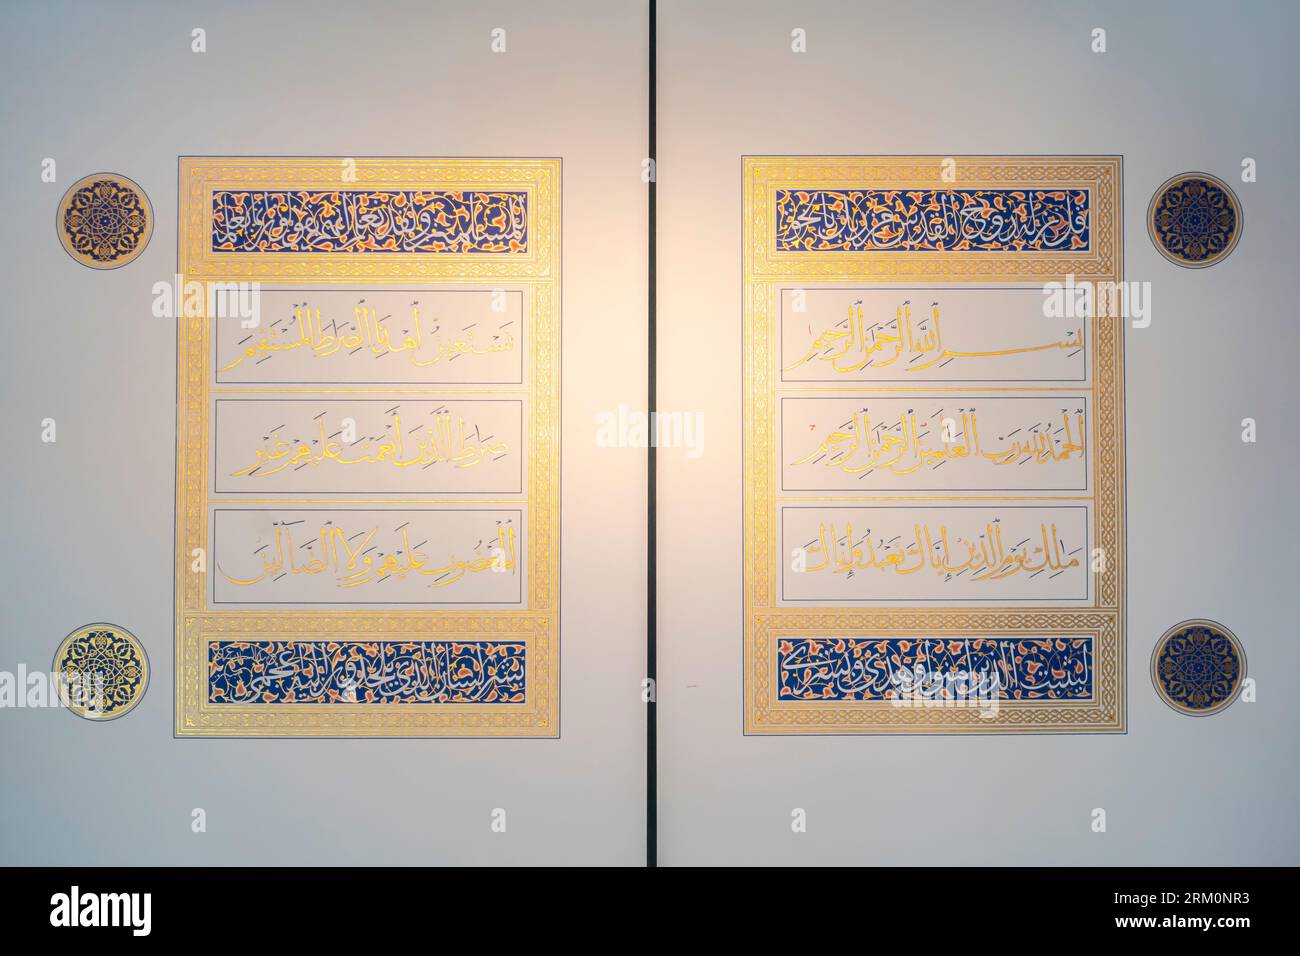 Mamluk and Il-Khanid masterpieces collection  plates 9R & 9L - based on opening pages of juz 1 from Qu'ran manuscript 72. Rayhan script. Qu'ran I, 1-7 Stock Photo